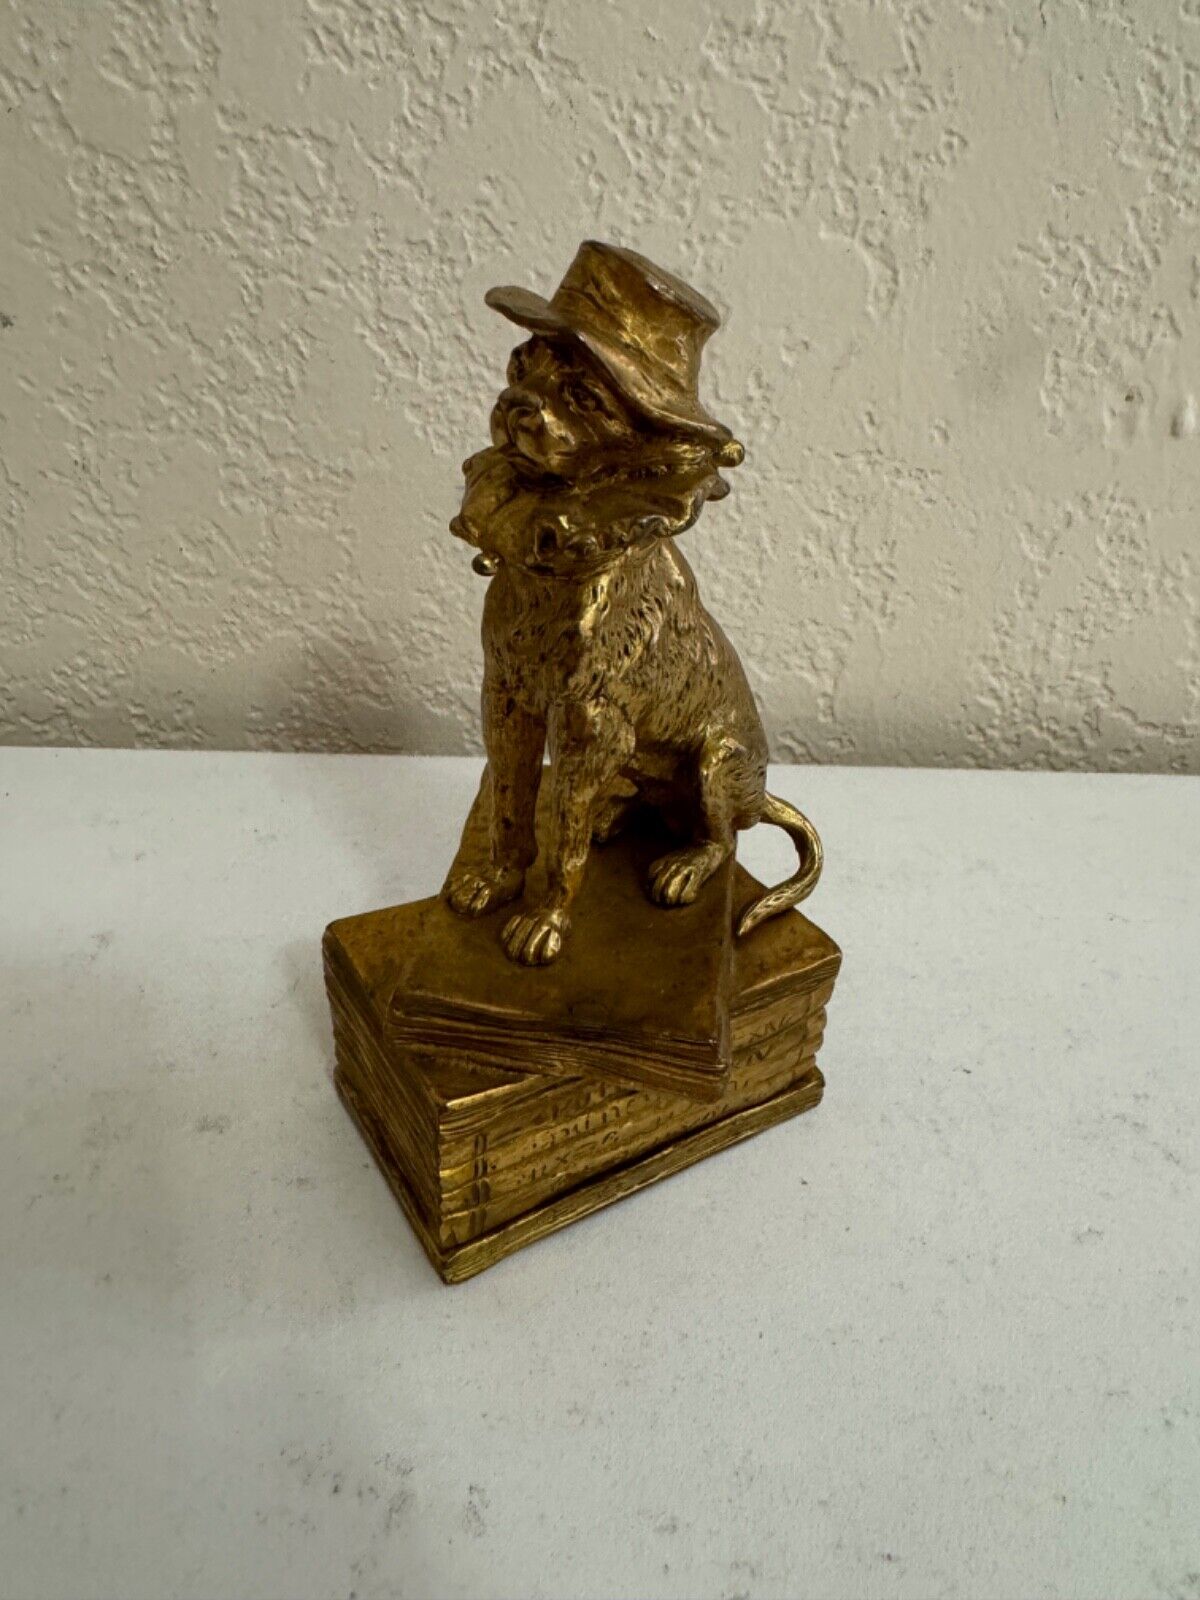 Vtg Antique Bronze Mr. Punch's Dog Toby Sitting on Books Figurine / Paperweight